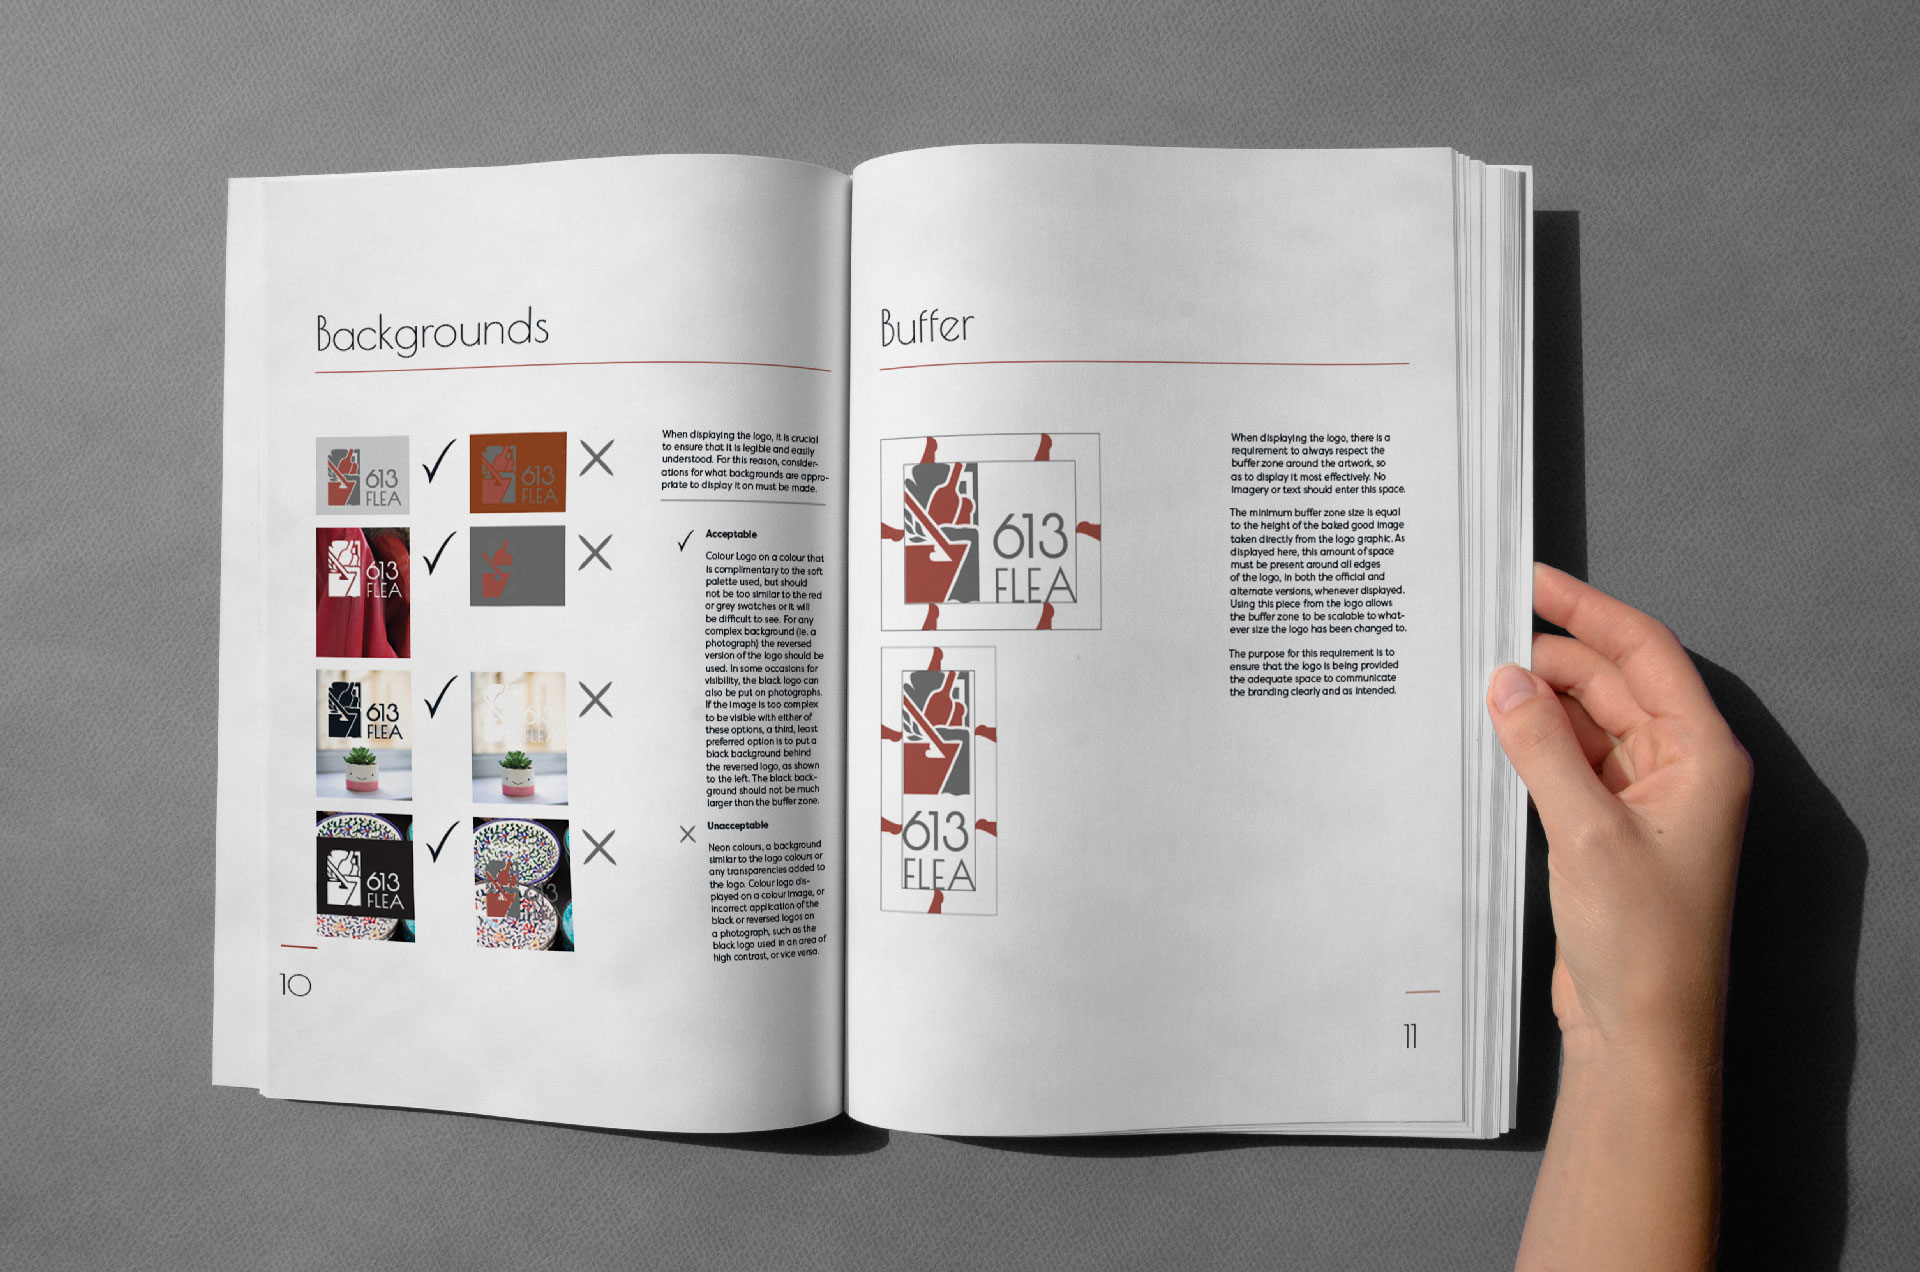 A hand opening the guidelines to a page about backgrounds and a page about buffers.